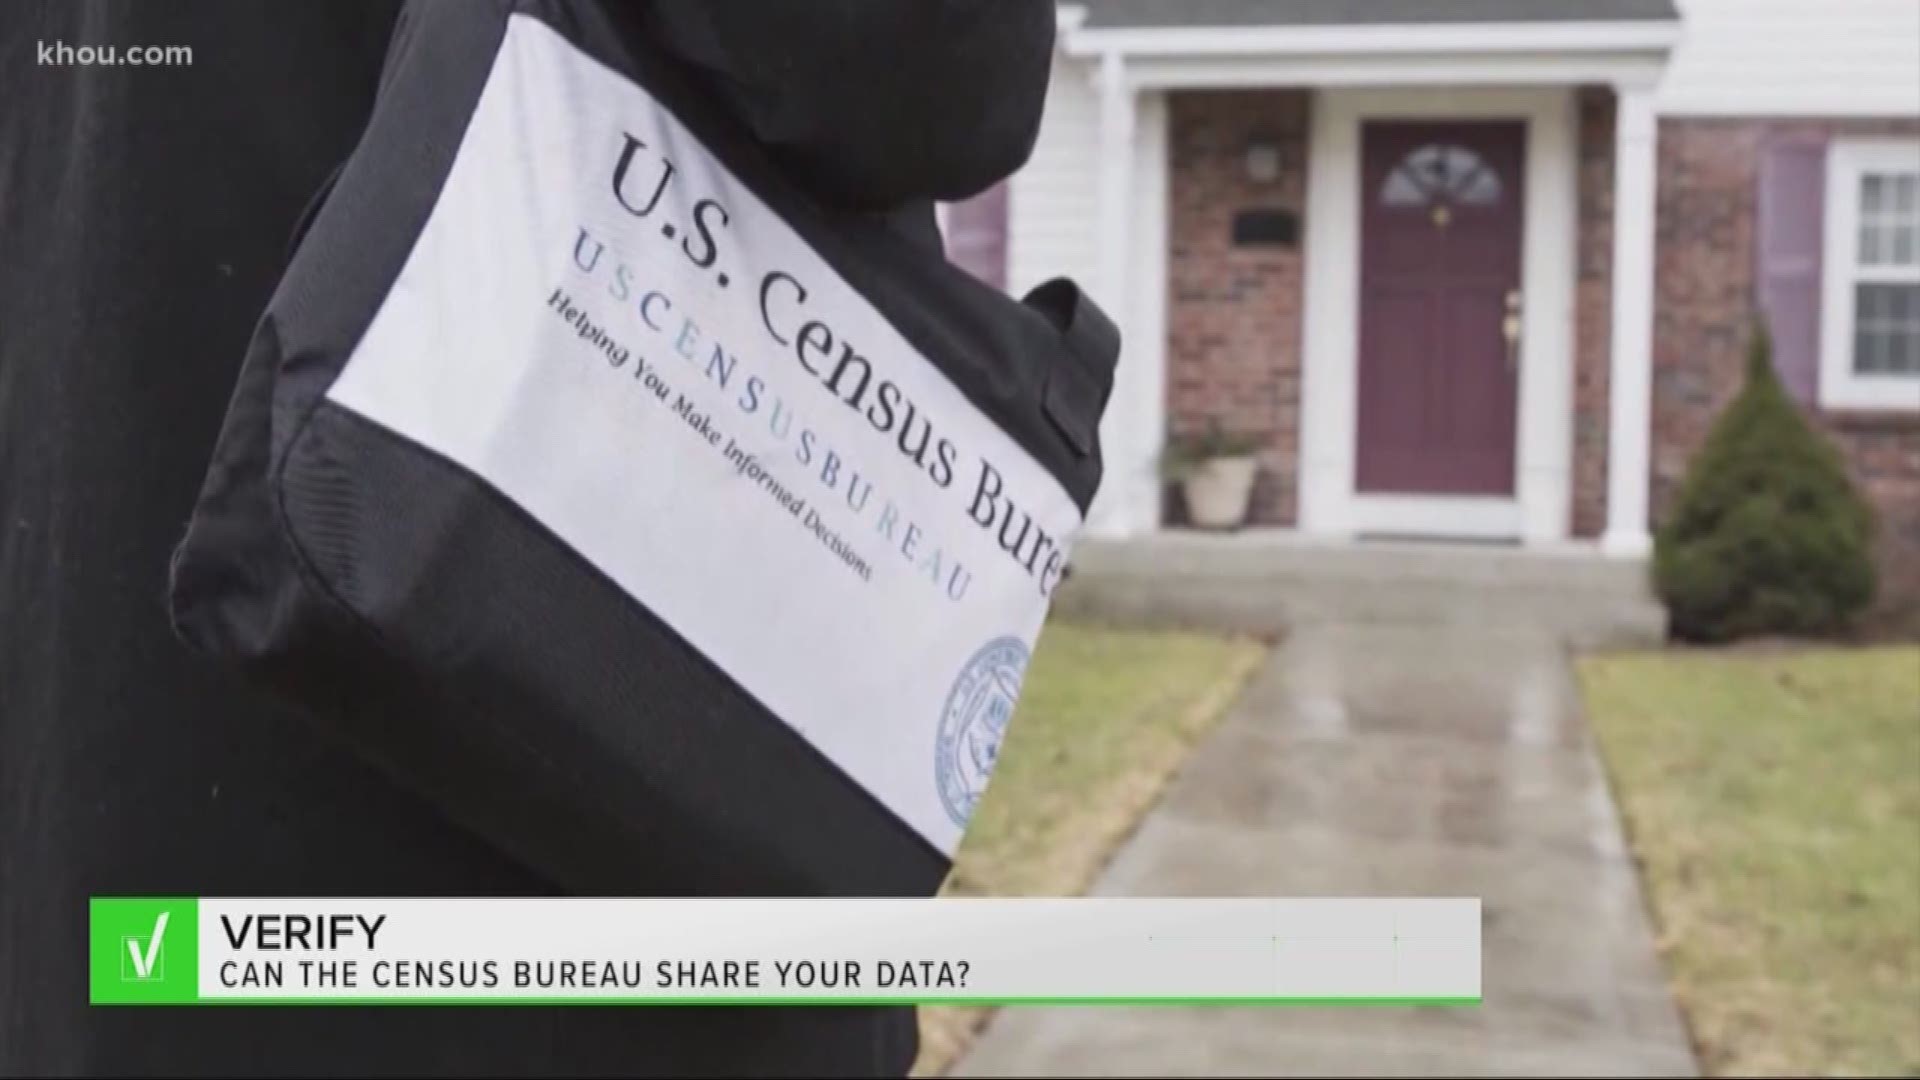 One thing that's been at the center of the Census debate is the fear that non-citizens could put themselves at risk by telling the government of their status. But can Census takers really share their data with ICE?